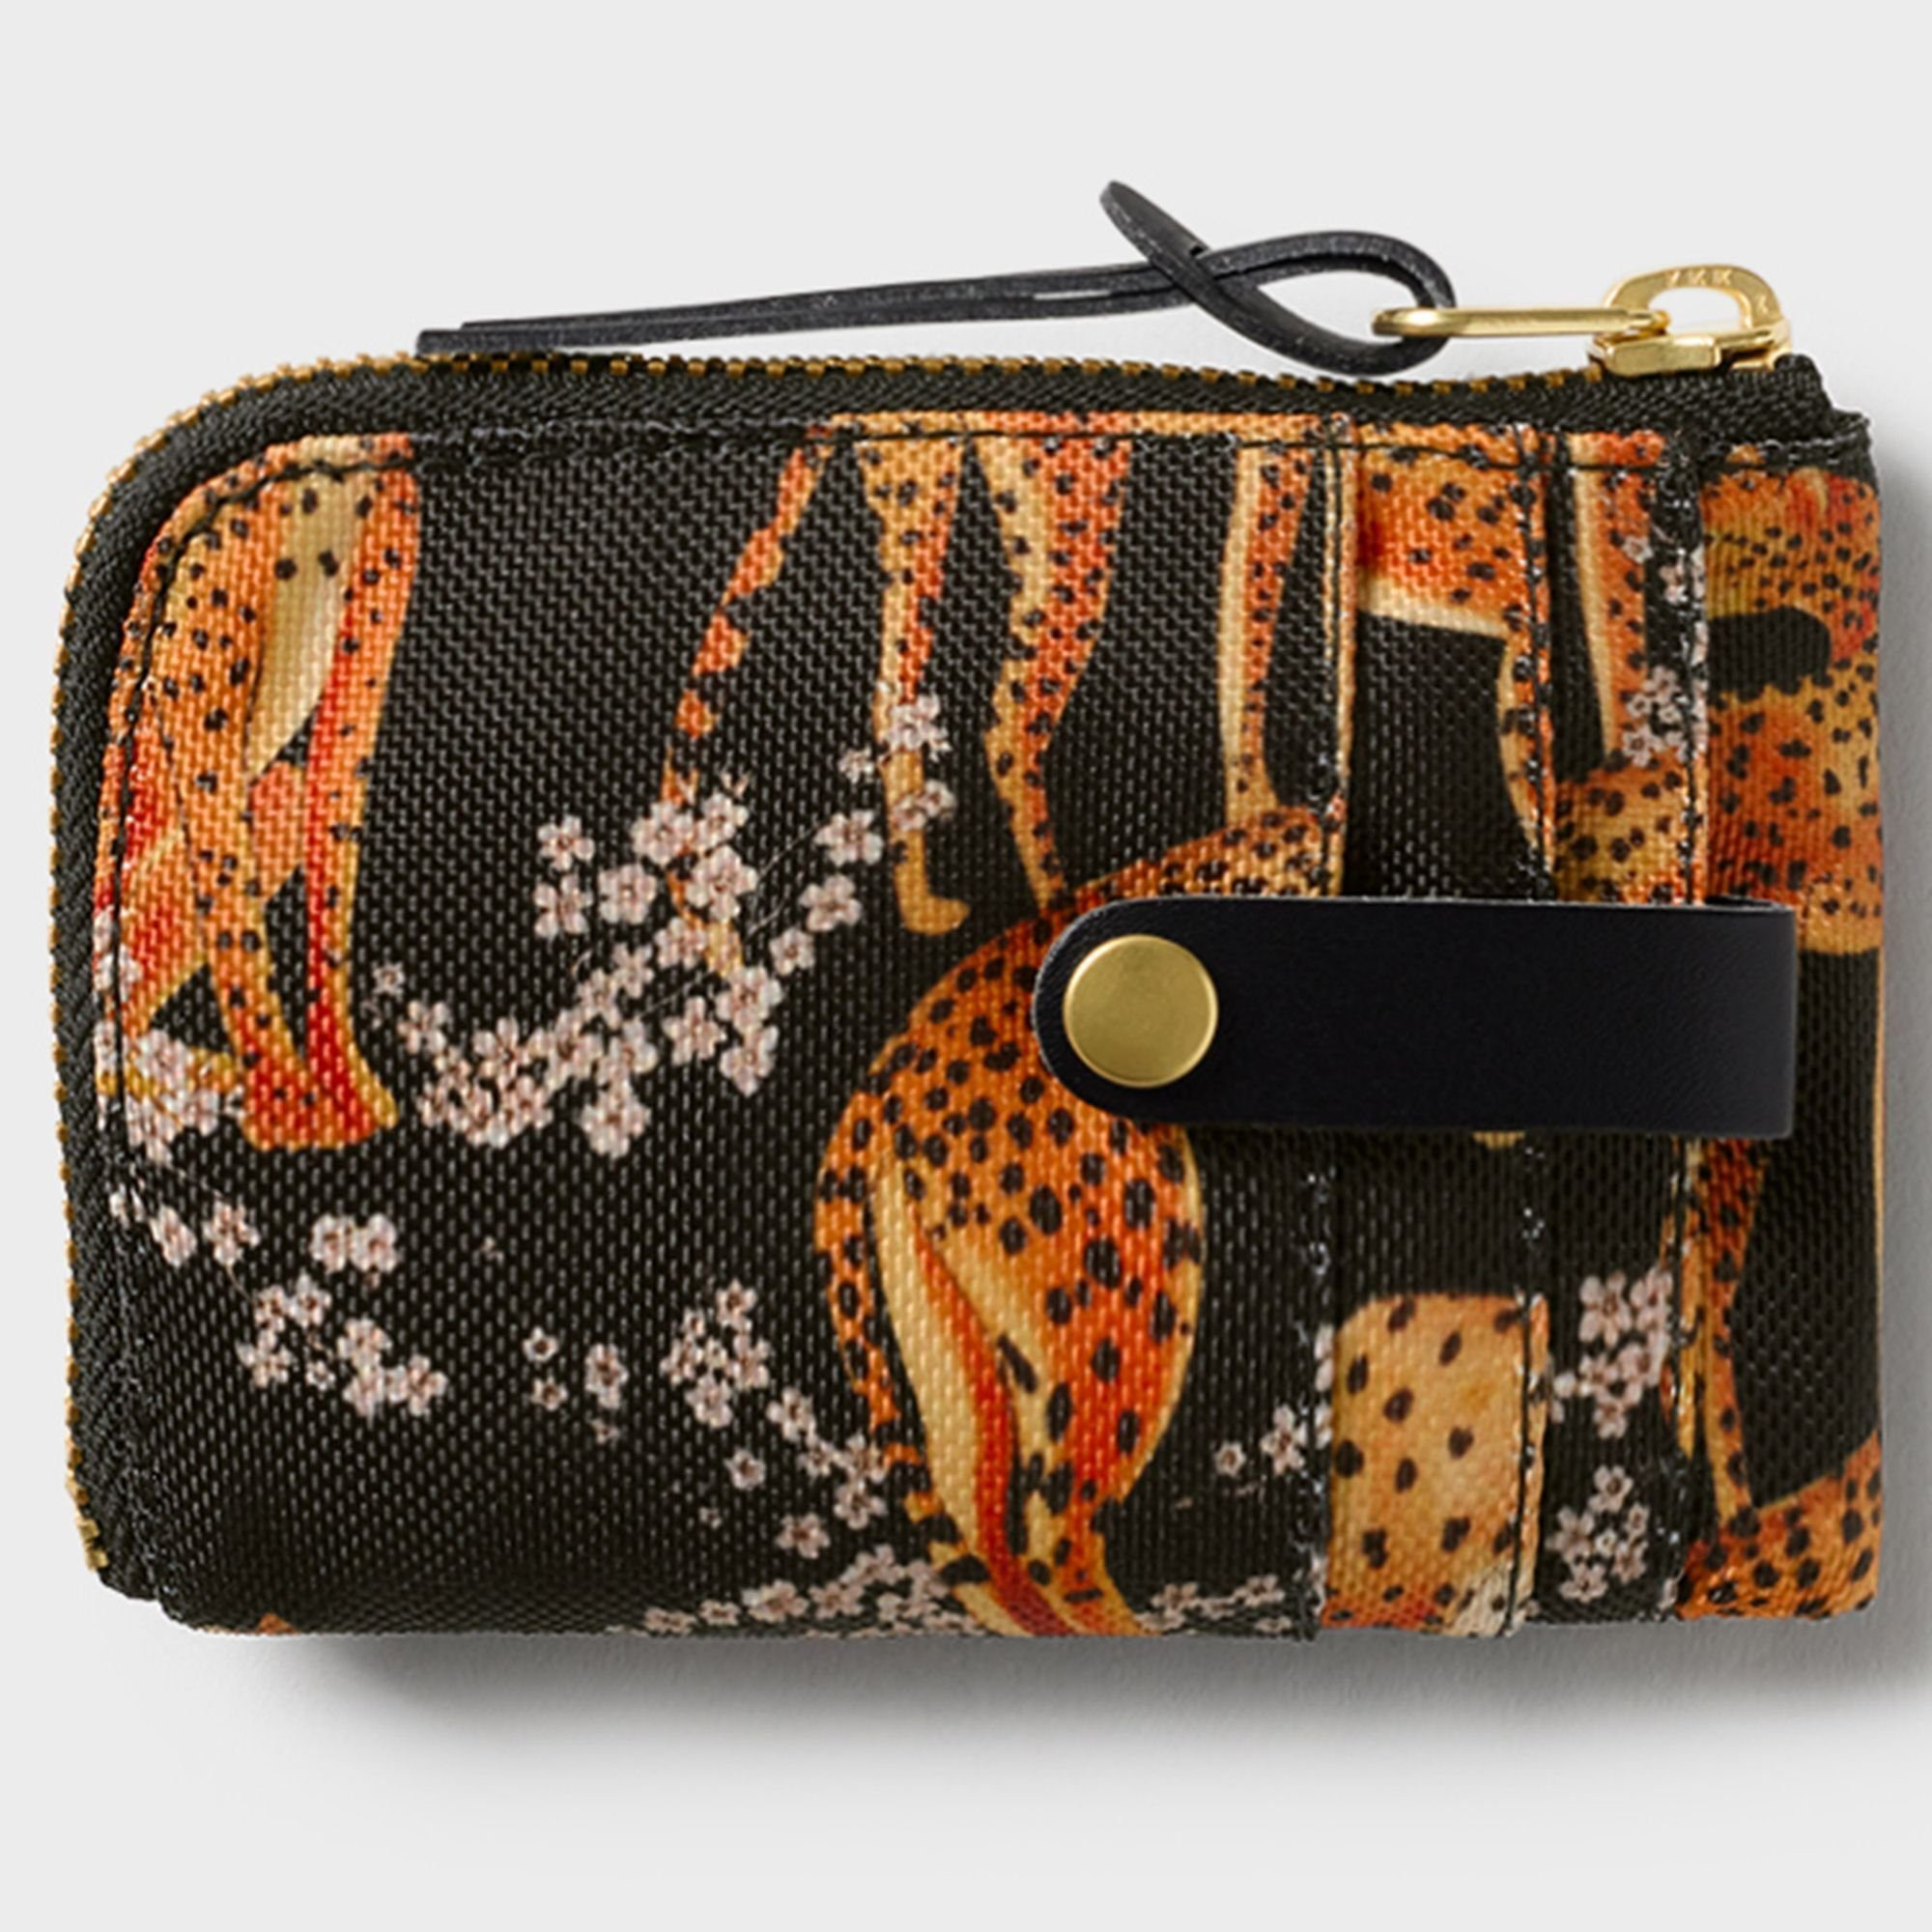 Daily, Wouf salome Etui Polyester